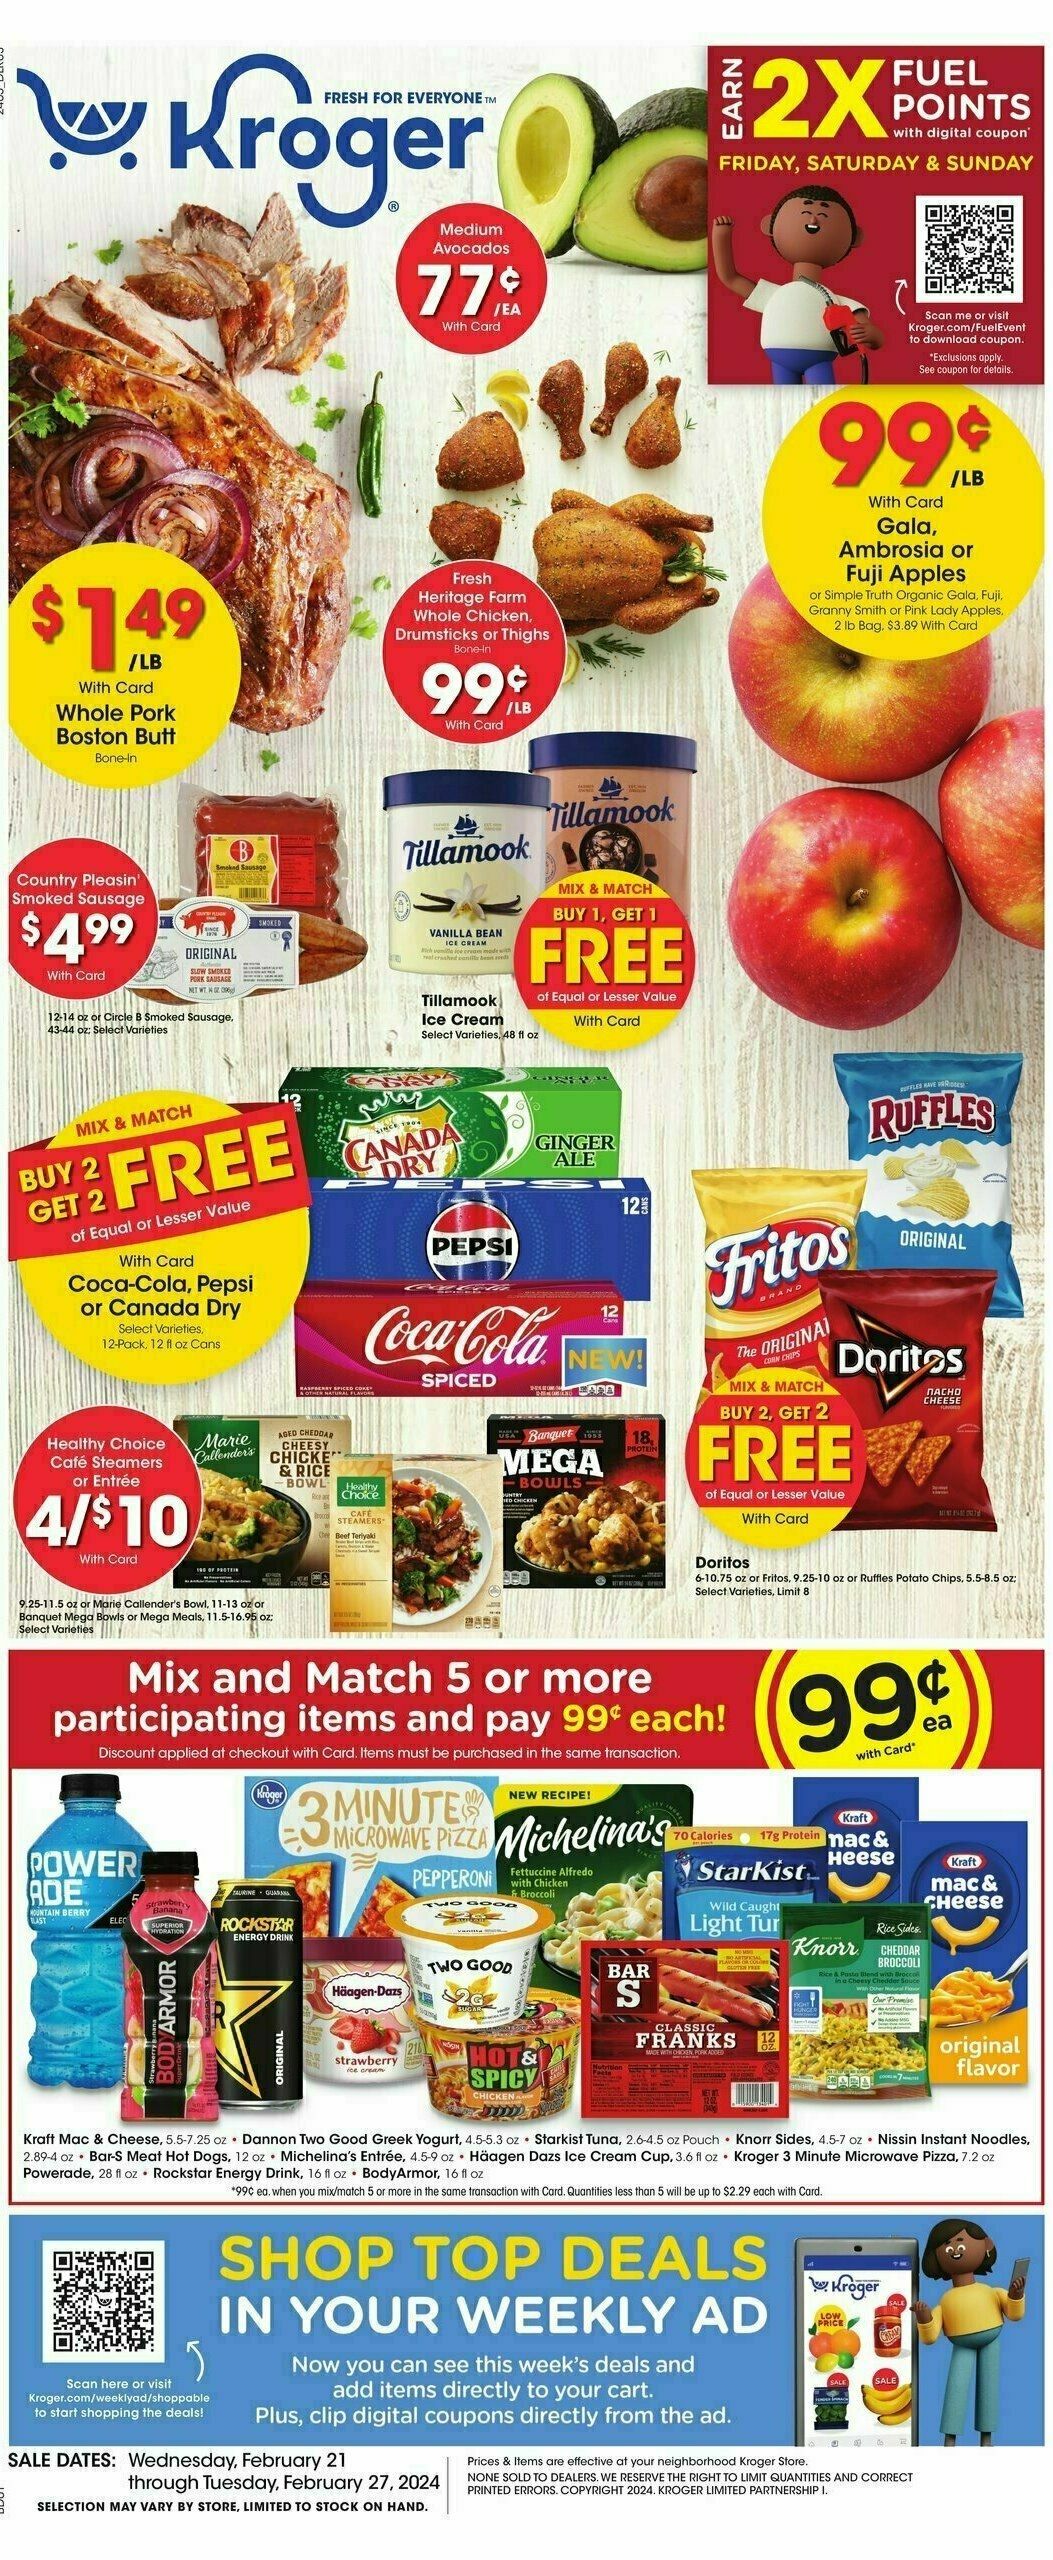 Kroger Weekly Ad from February 21